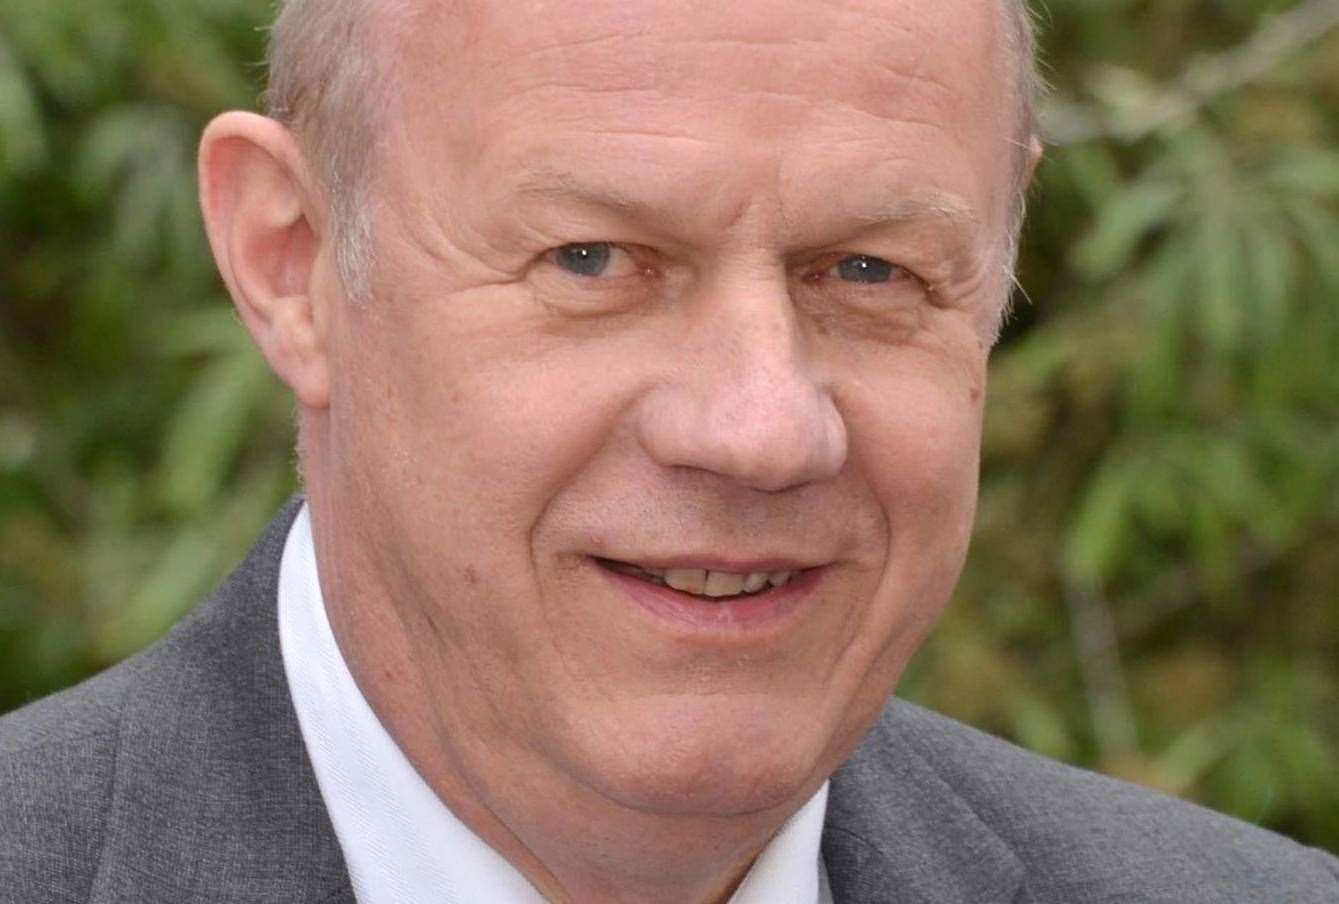 Damian Green was not picked as the Tory candidate for the new Weald of Kent seat last week